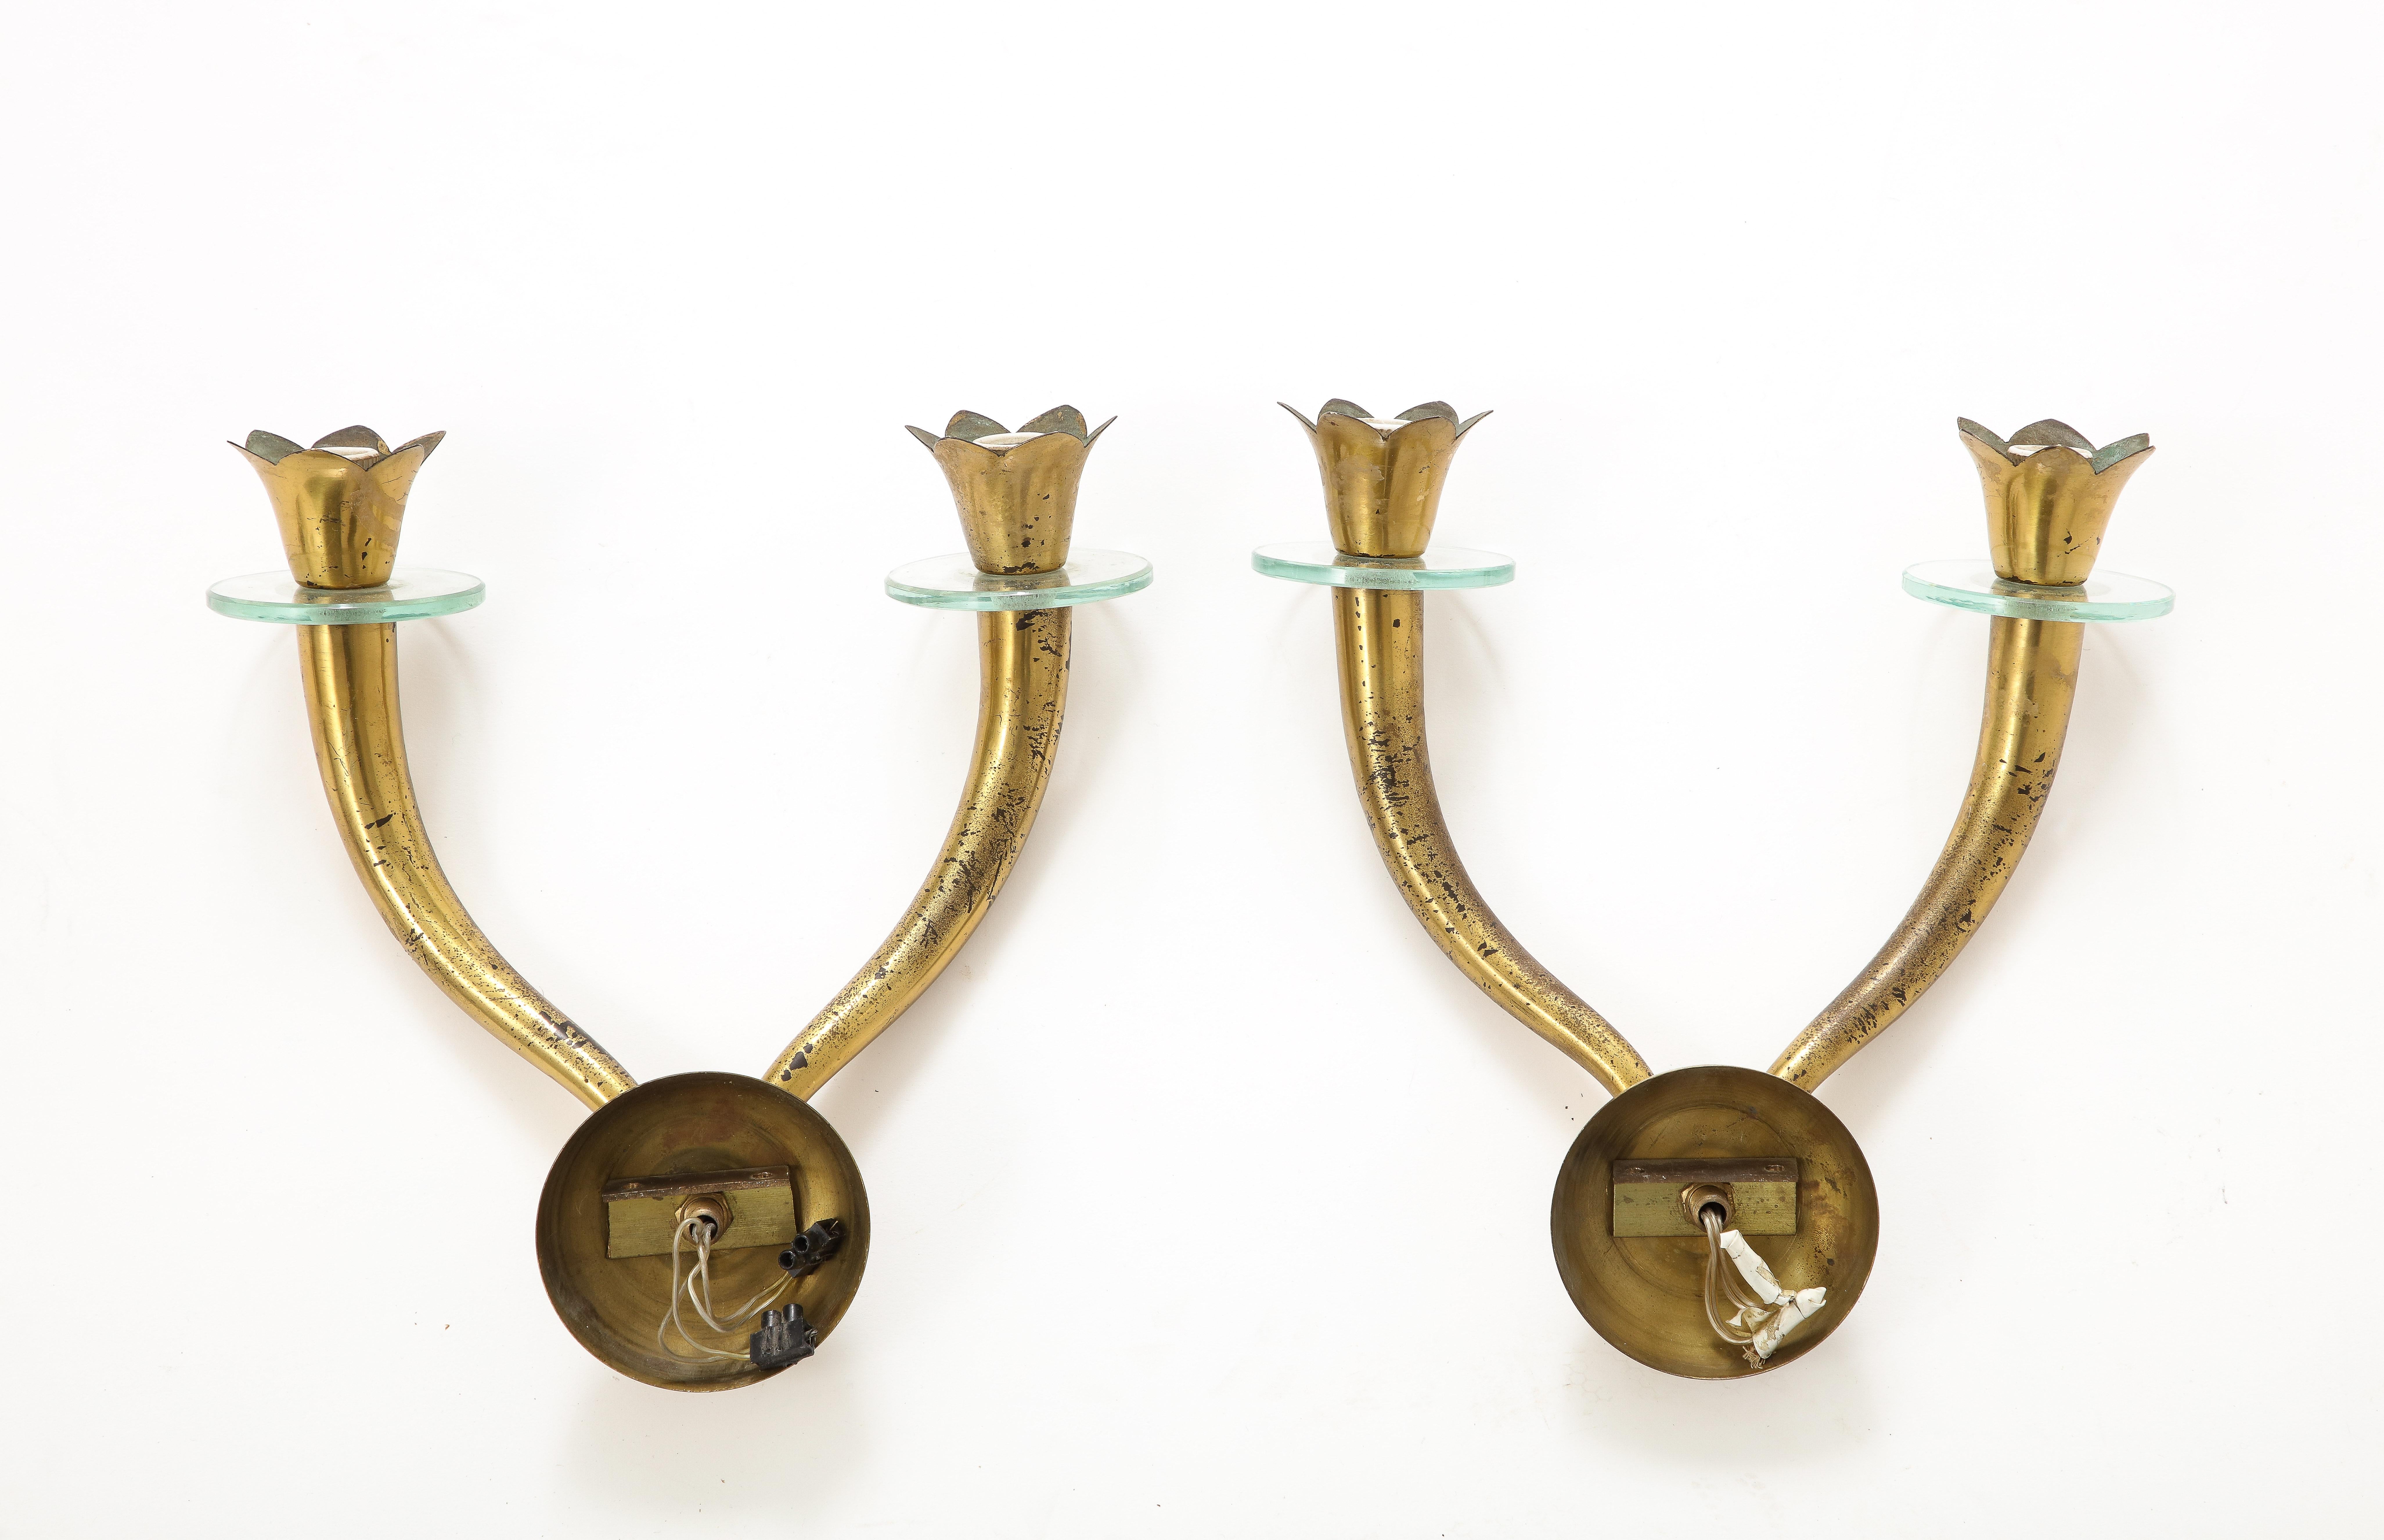 Pair of Brass and Glass Modernist Sconces Att. Emilio Lancia - Italy 1950s For Sale 5